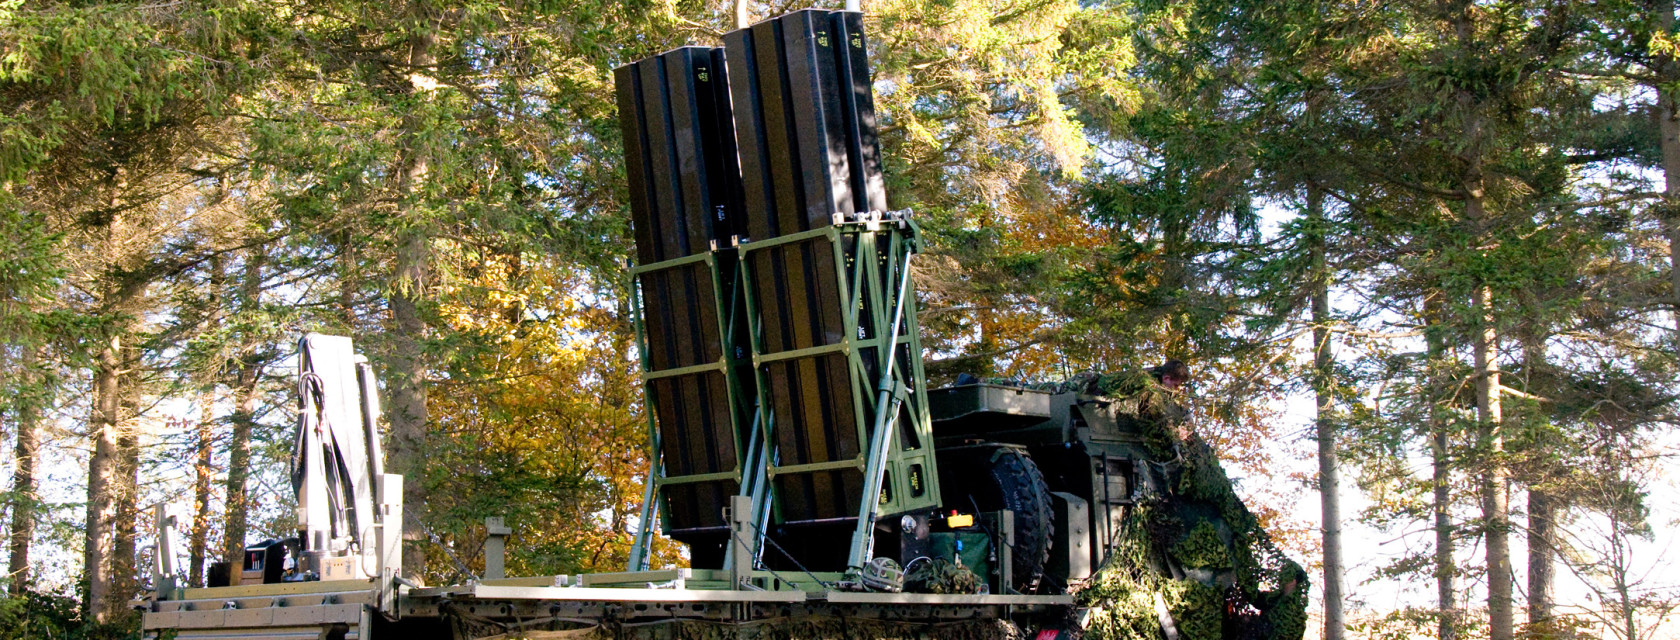 CAMM FLAADS (Common Anti-Air Modular Missile Future Local Area Air Defence System)